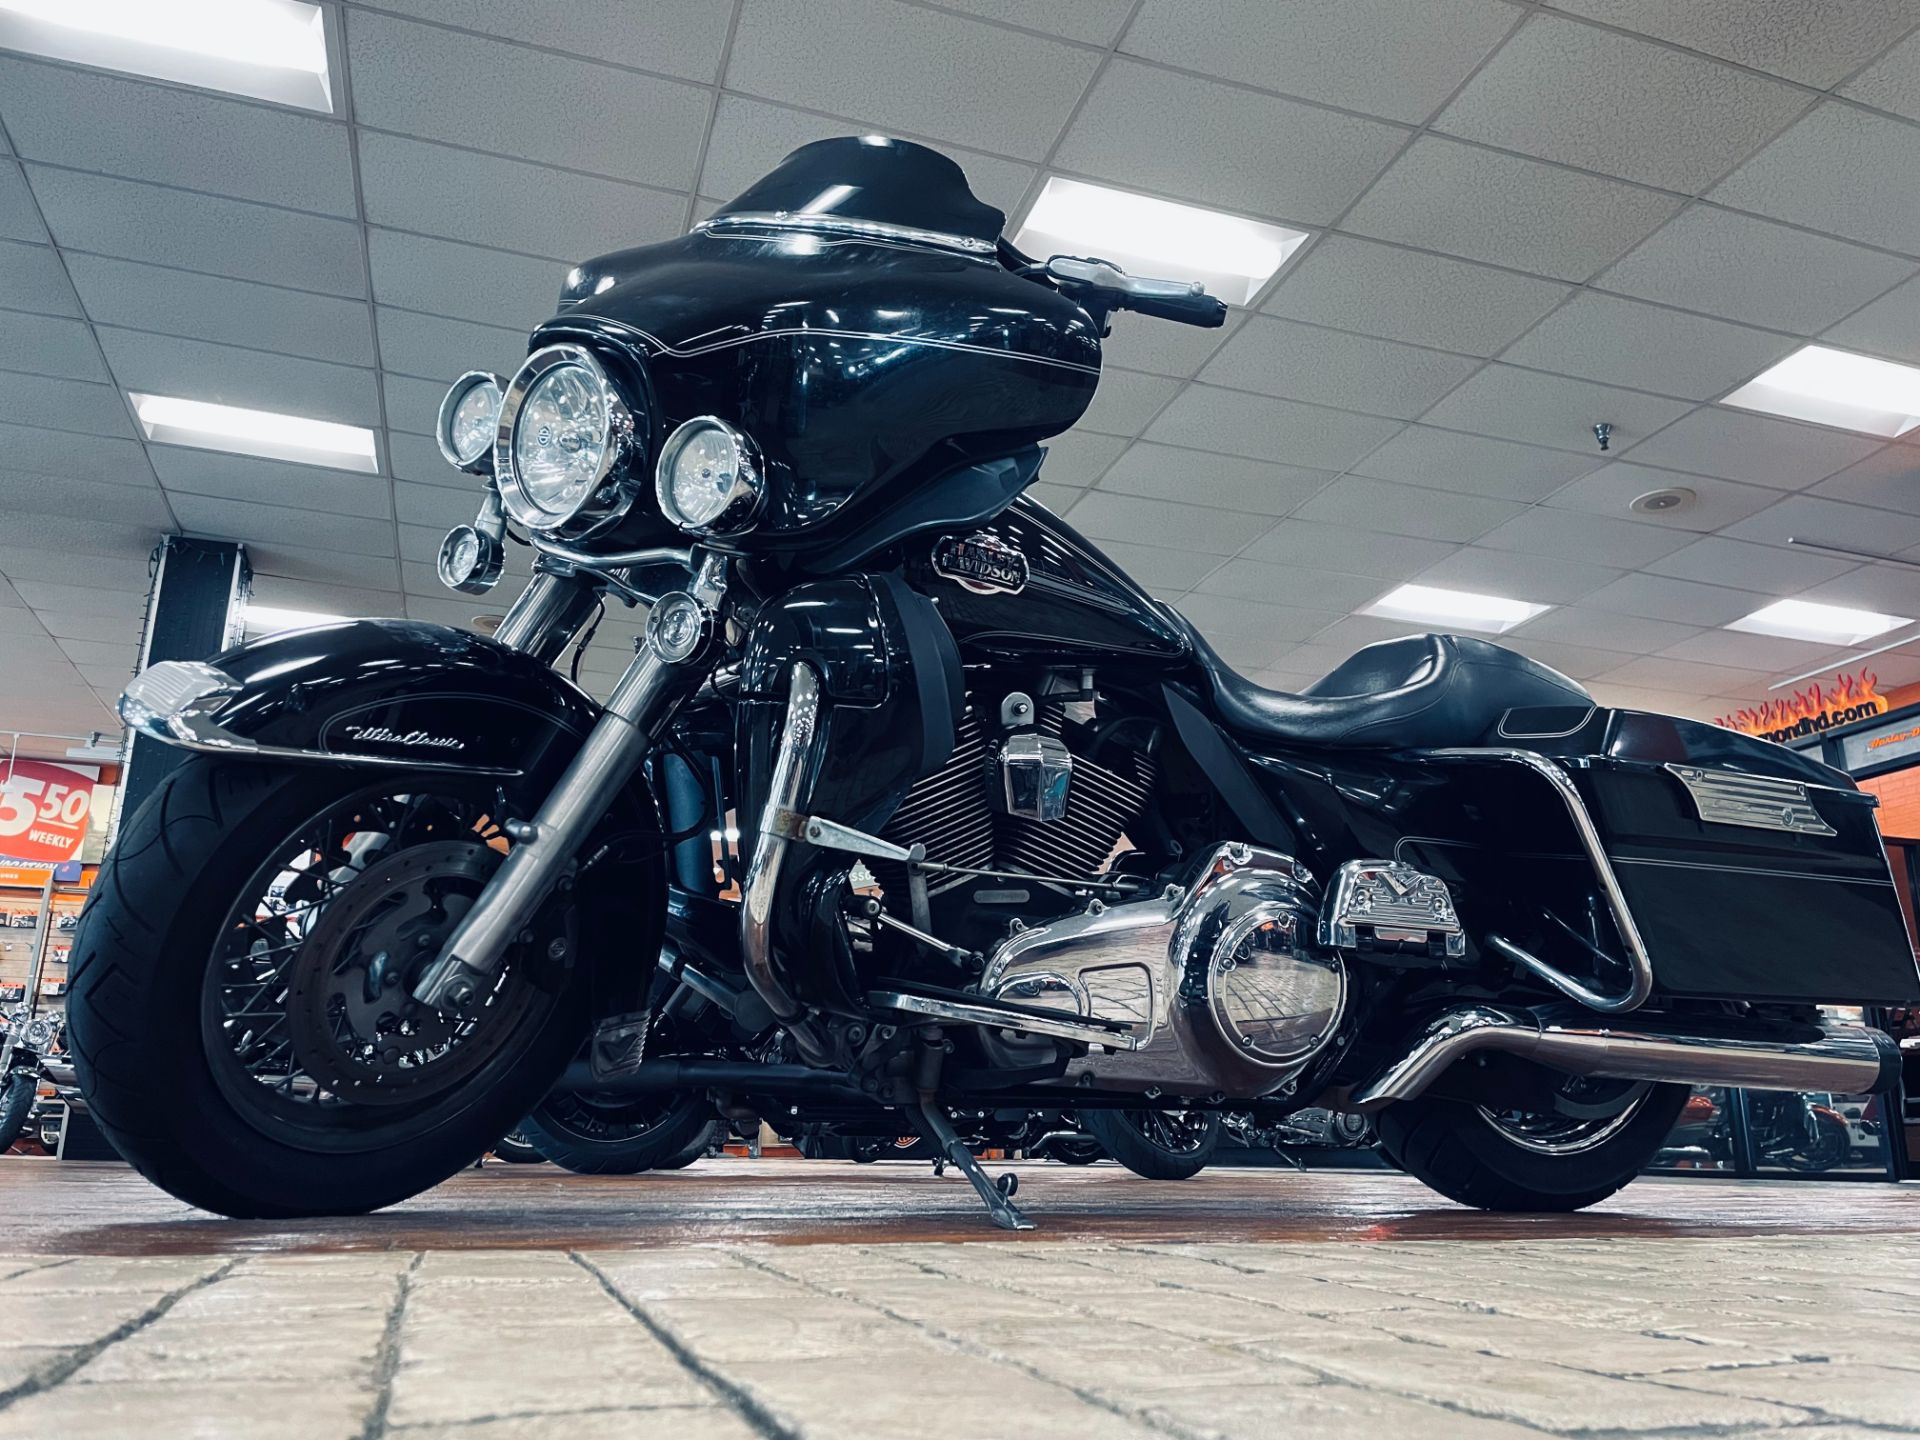 Used 2011 Harley Davidson Ultra Classic Electra Glide Black W Pinstripe Motorcycles In Marion Il Up630878